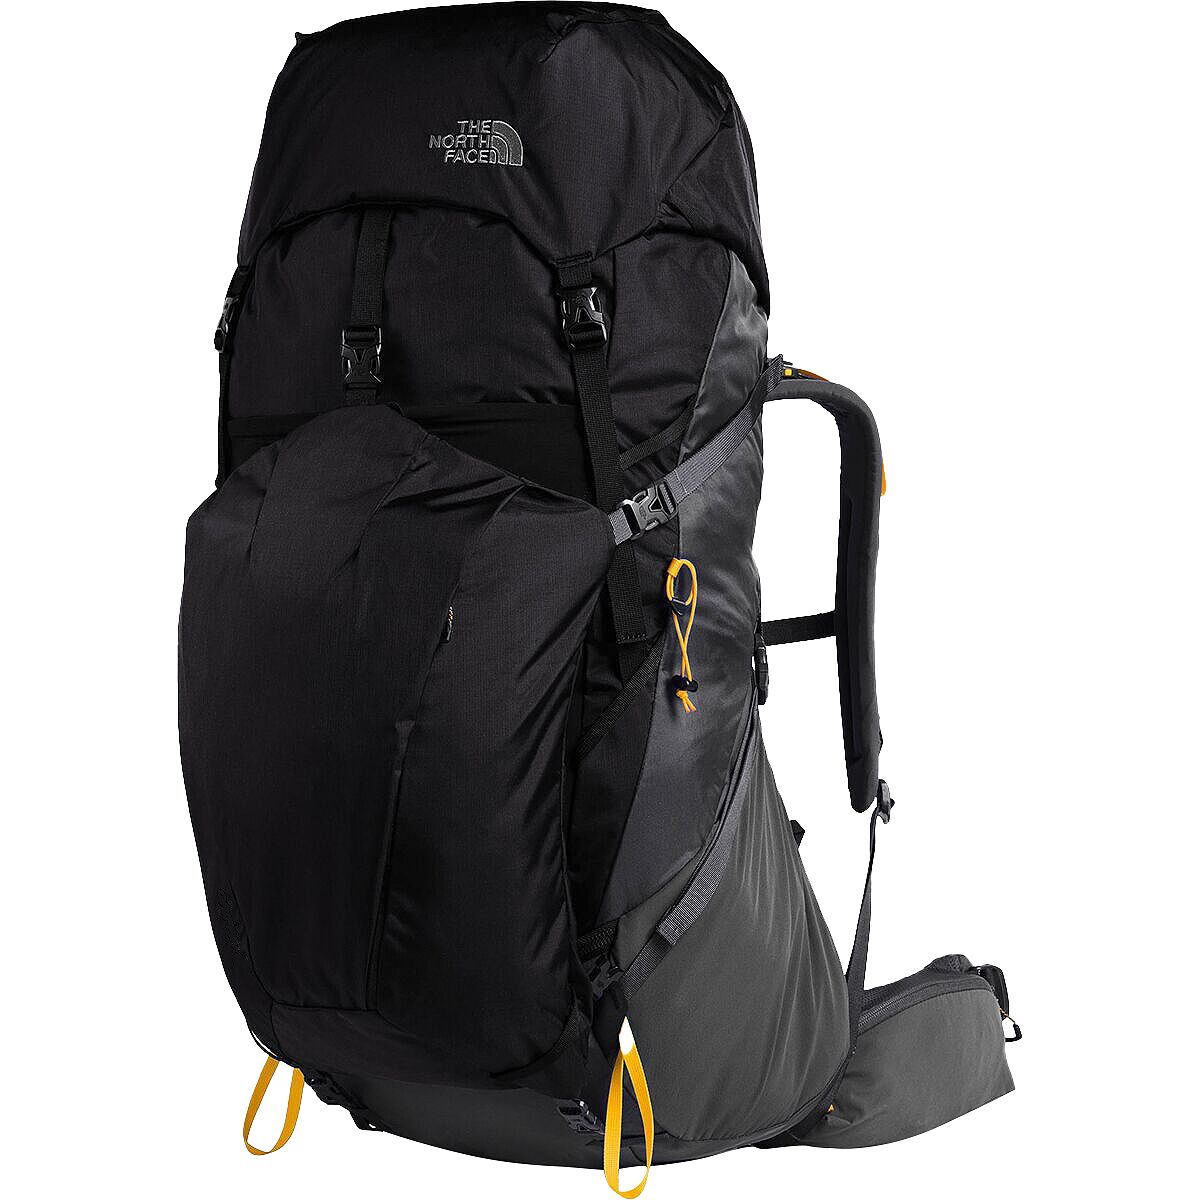 The North Face Griffin 65L Backpack